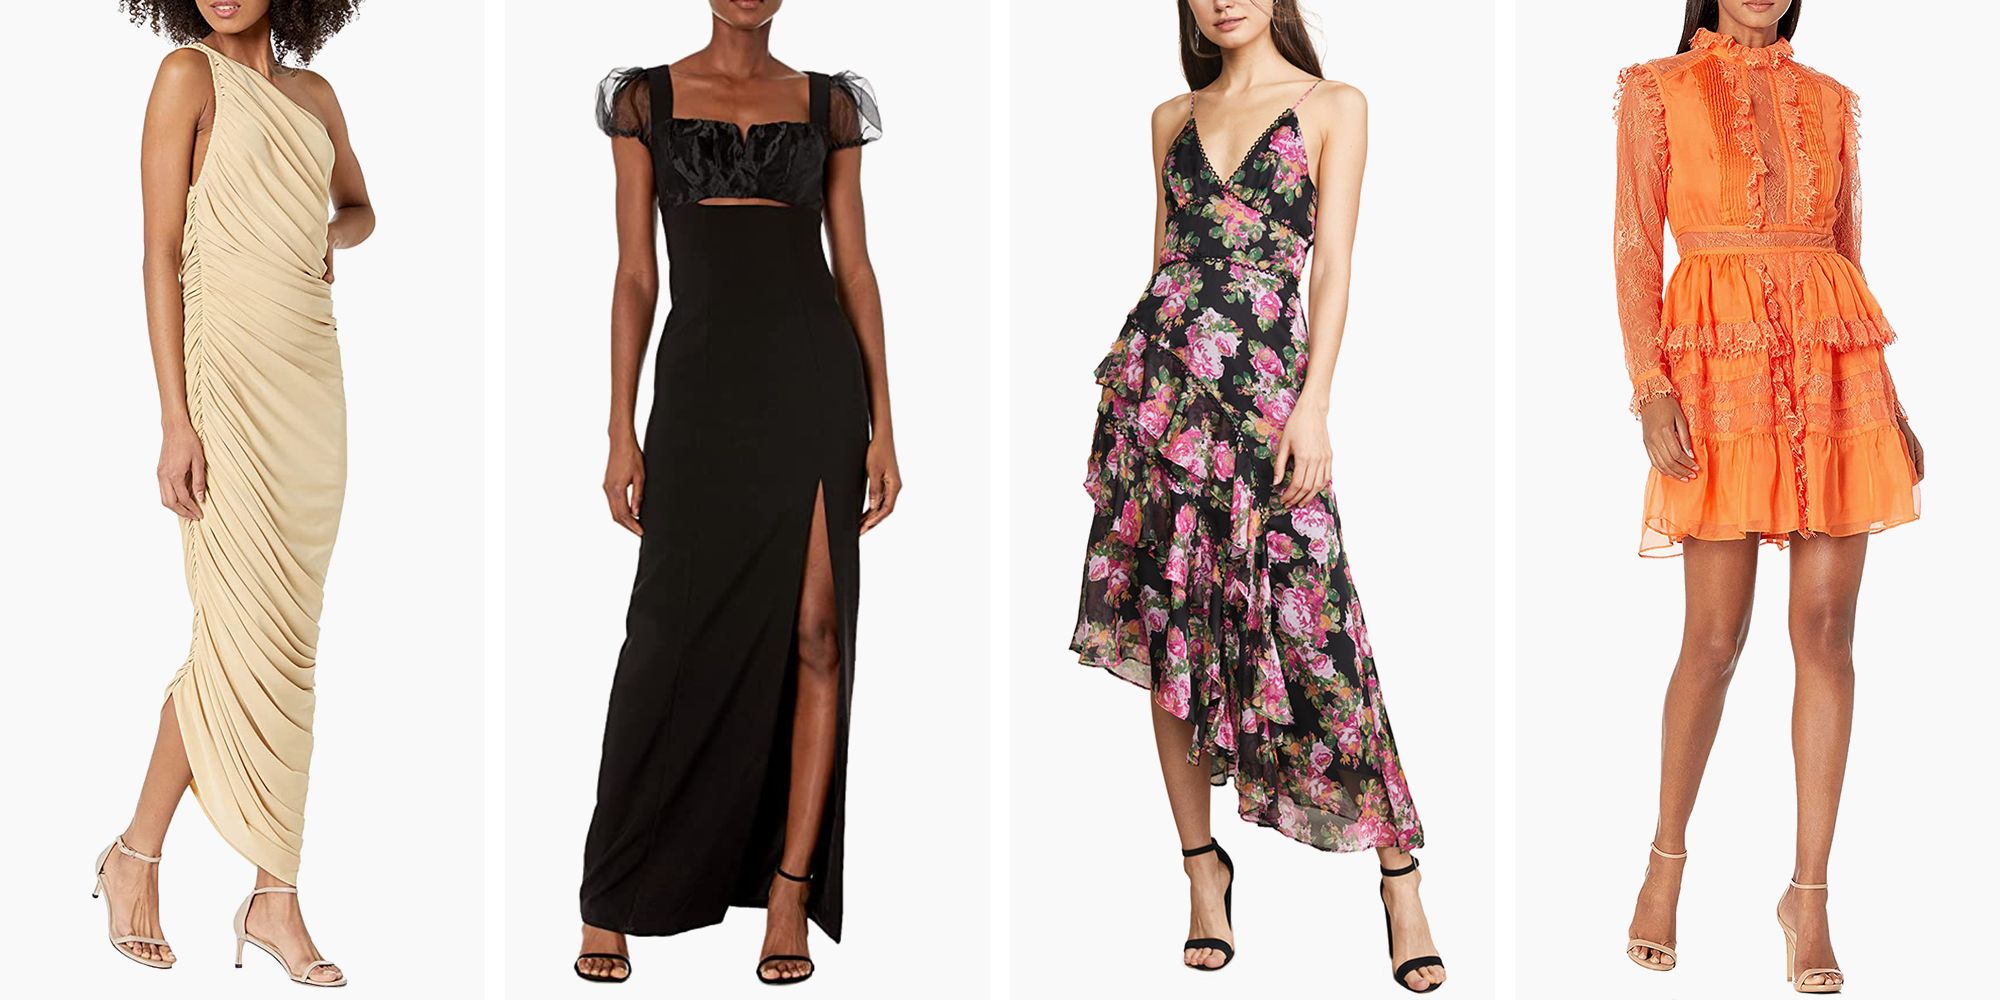 Best Wedding Guest Dresses From Amazon